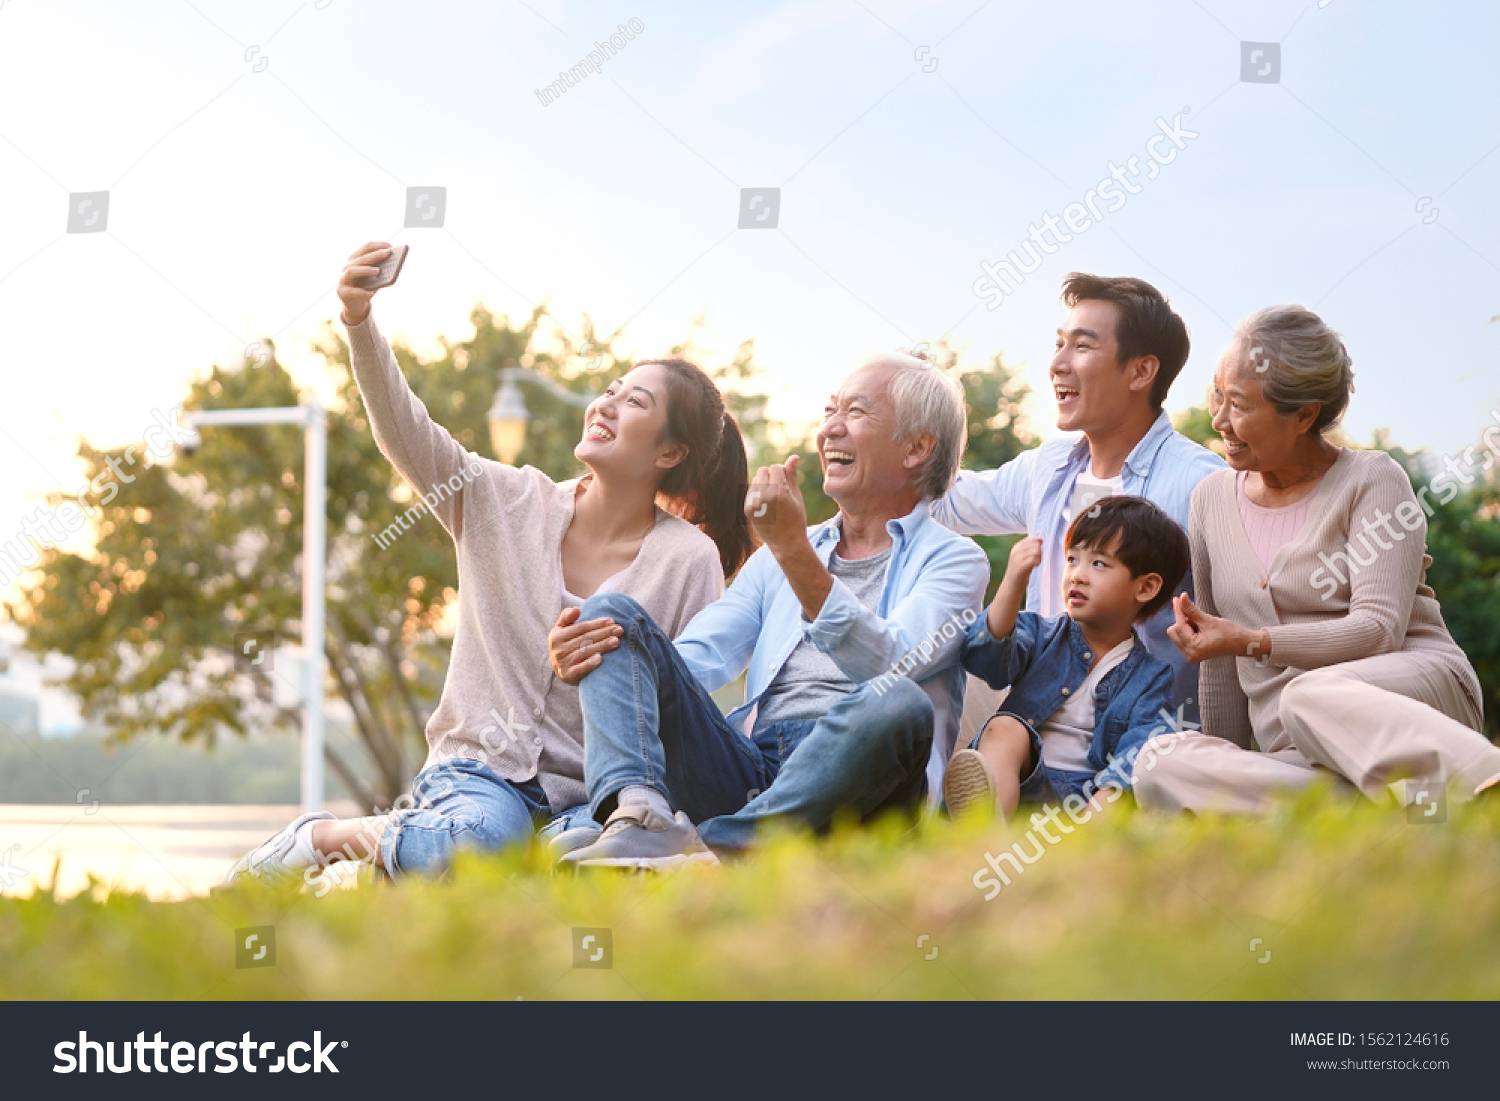 three generation happy asian family sitting on grass taking a selfie using mobile phone outdoors in park #1562124616